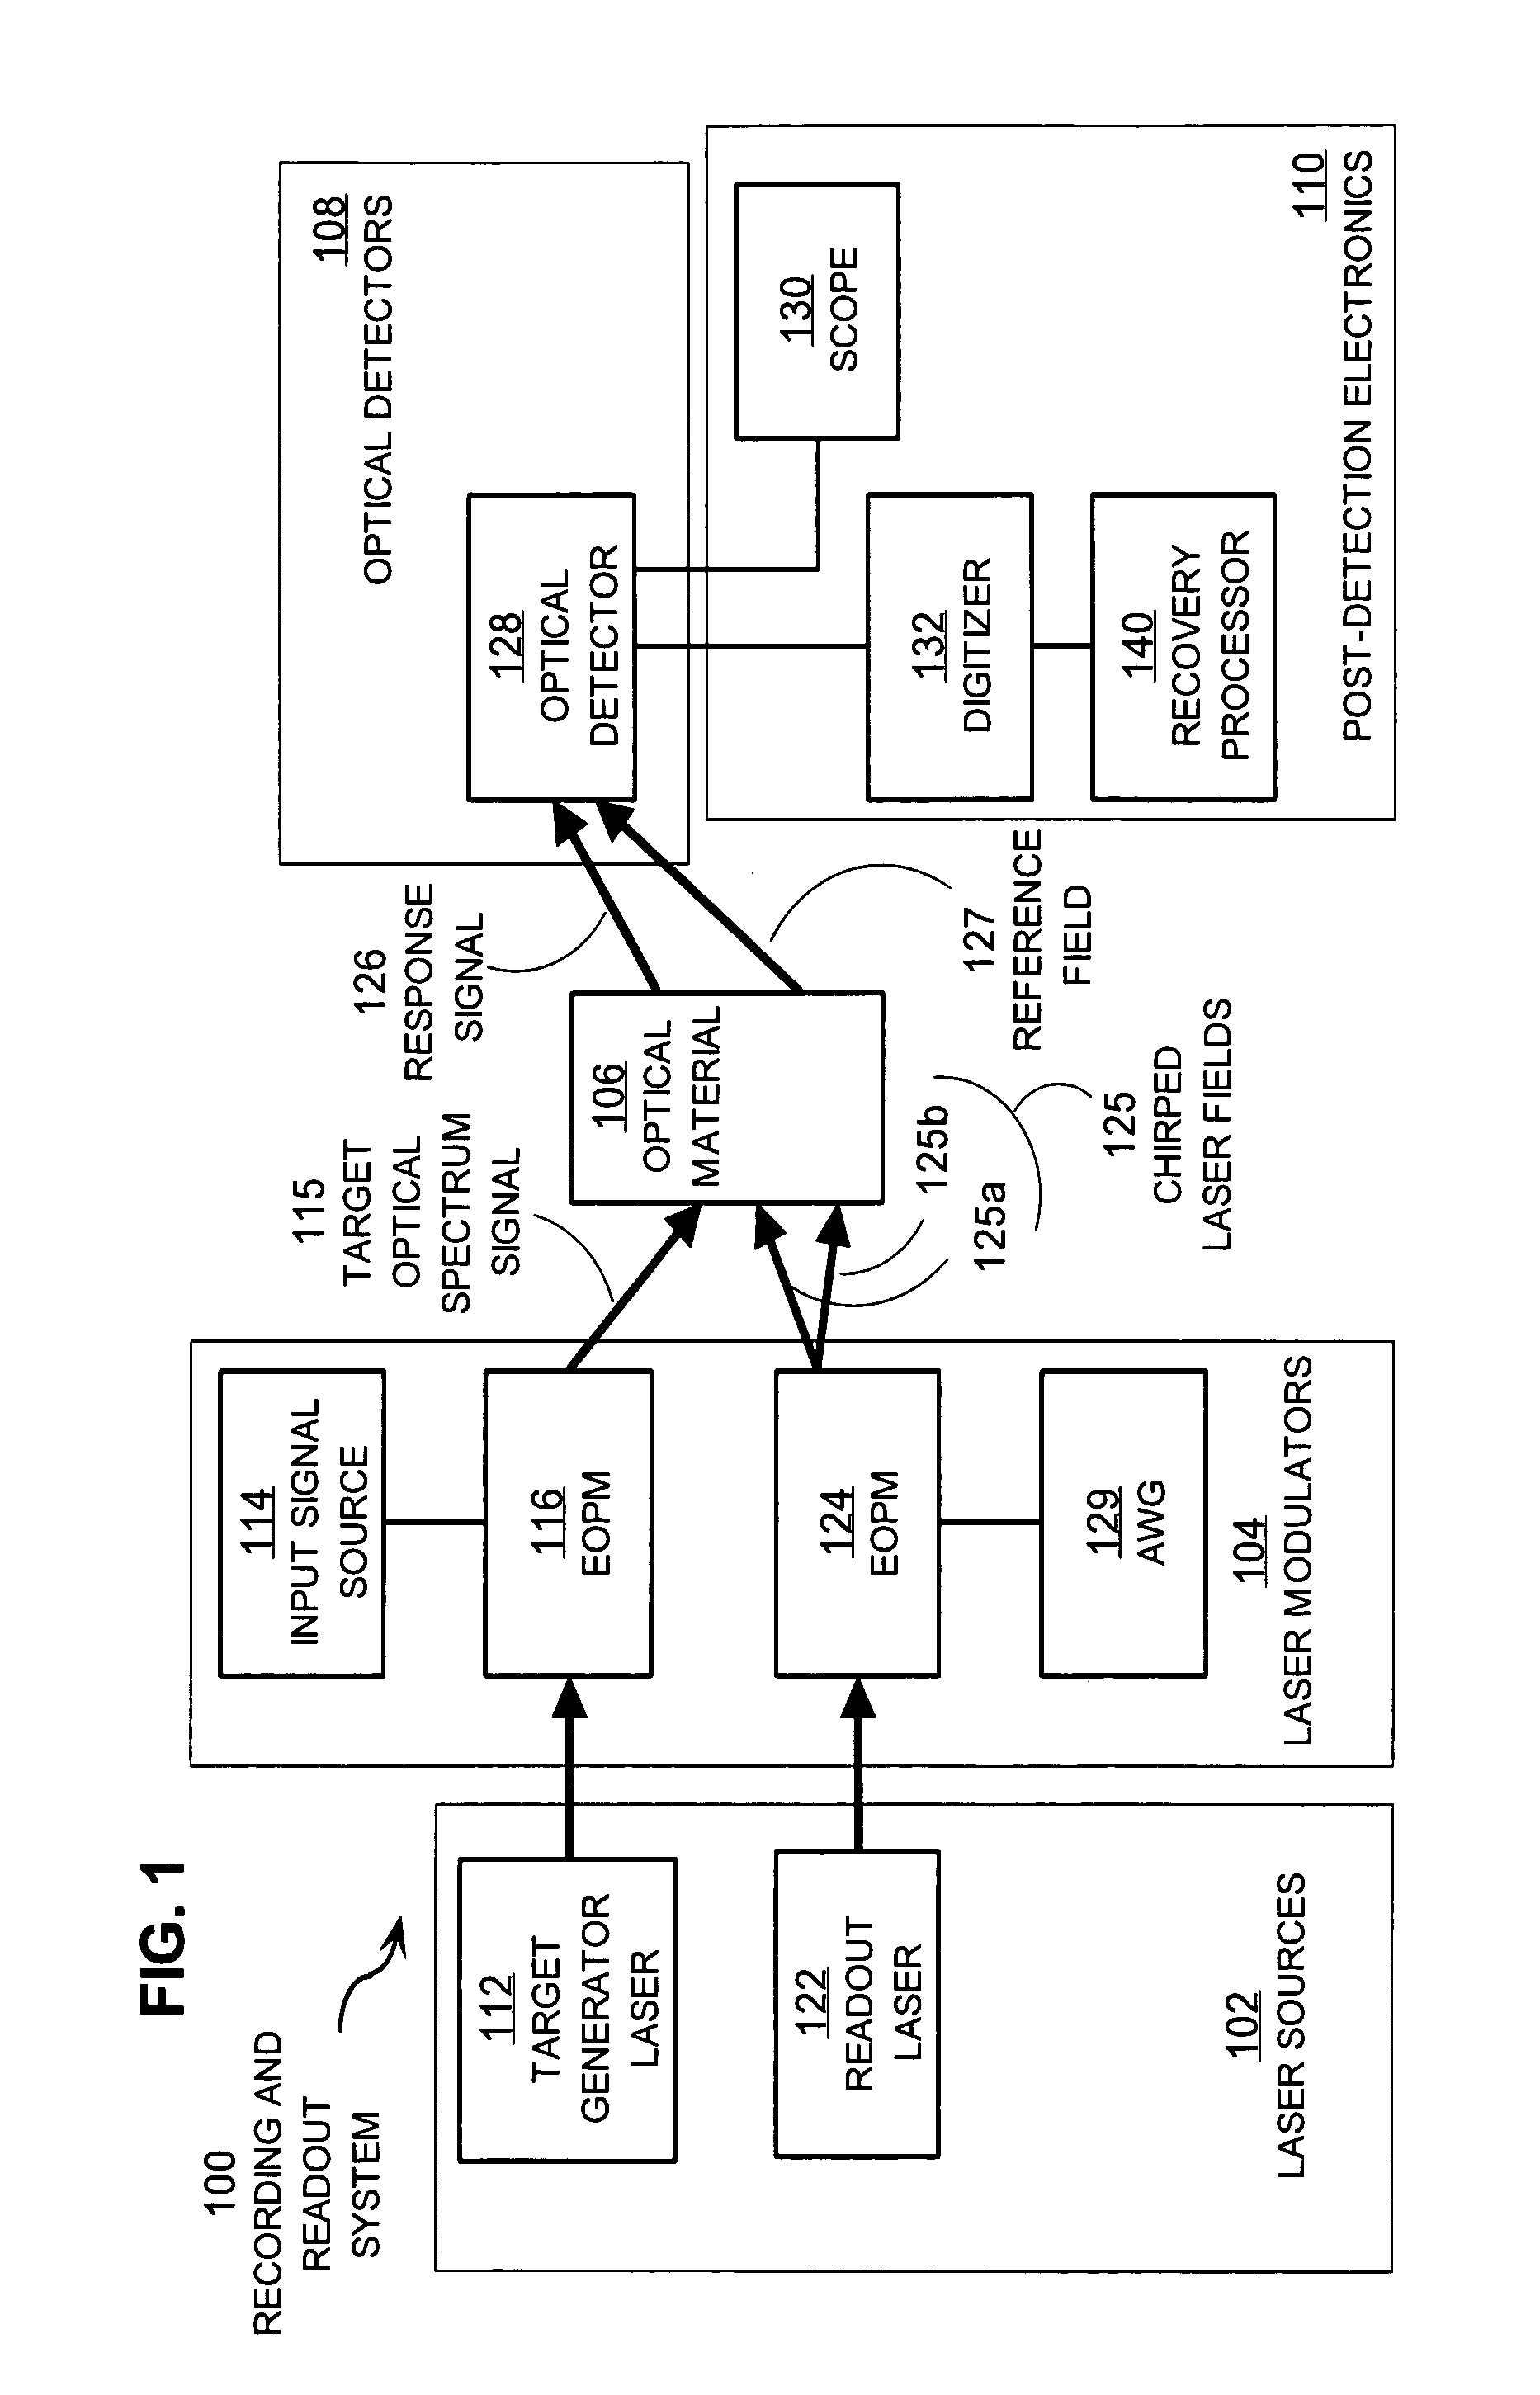 Techniques for recovering optical spectral features using a chirped optical field